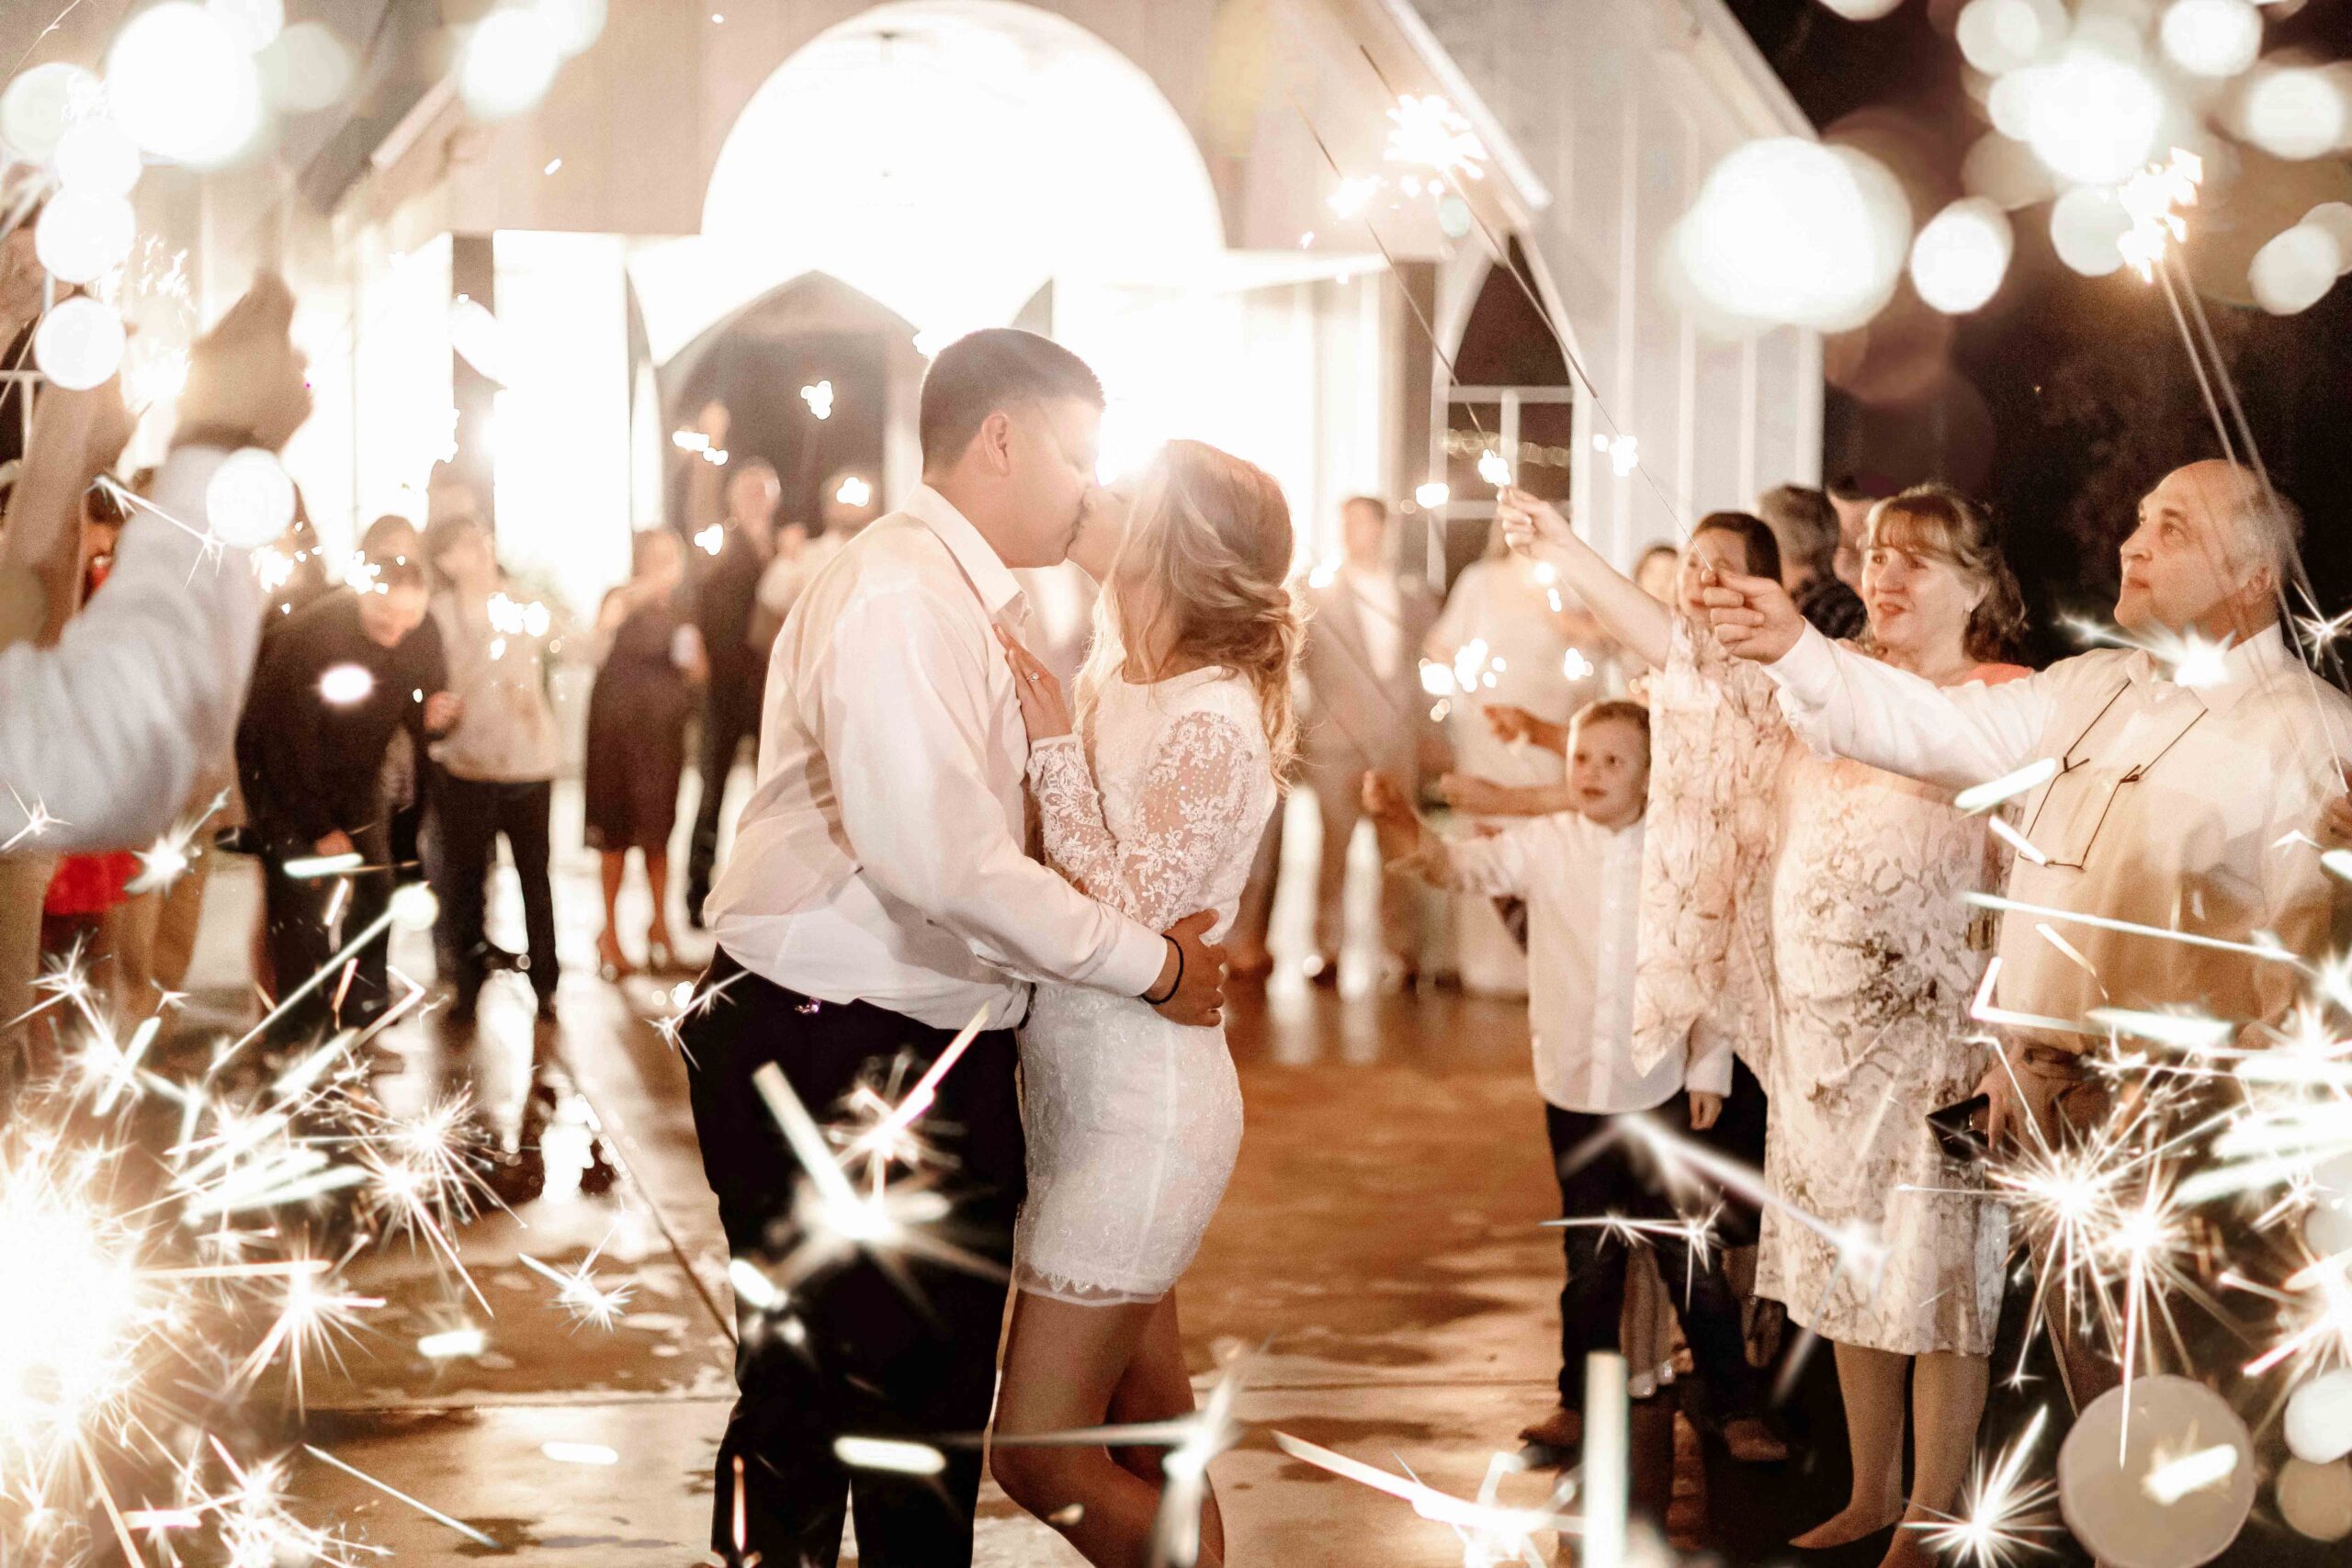 Photo of Bride and Groom kissing as they exit their wedding day among the guests lined up on either side with sparklers shining bright